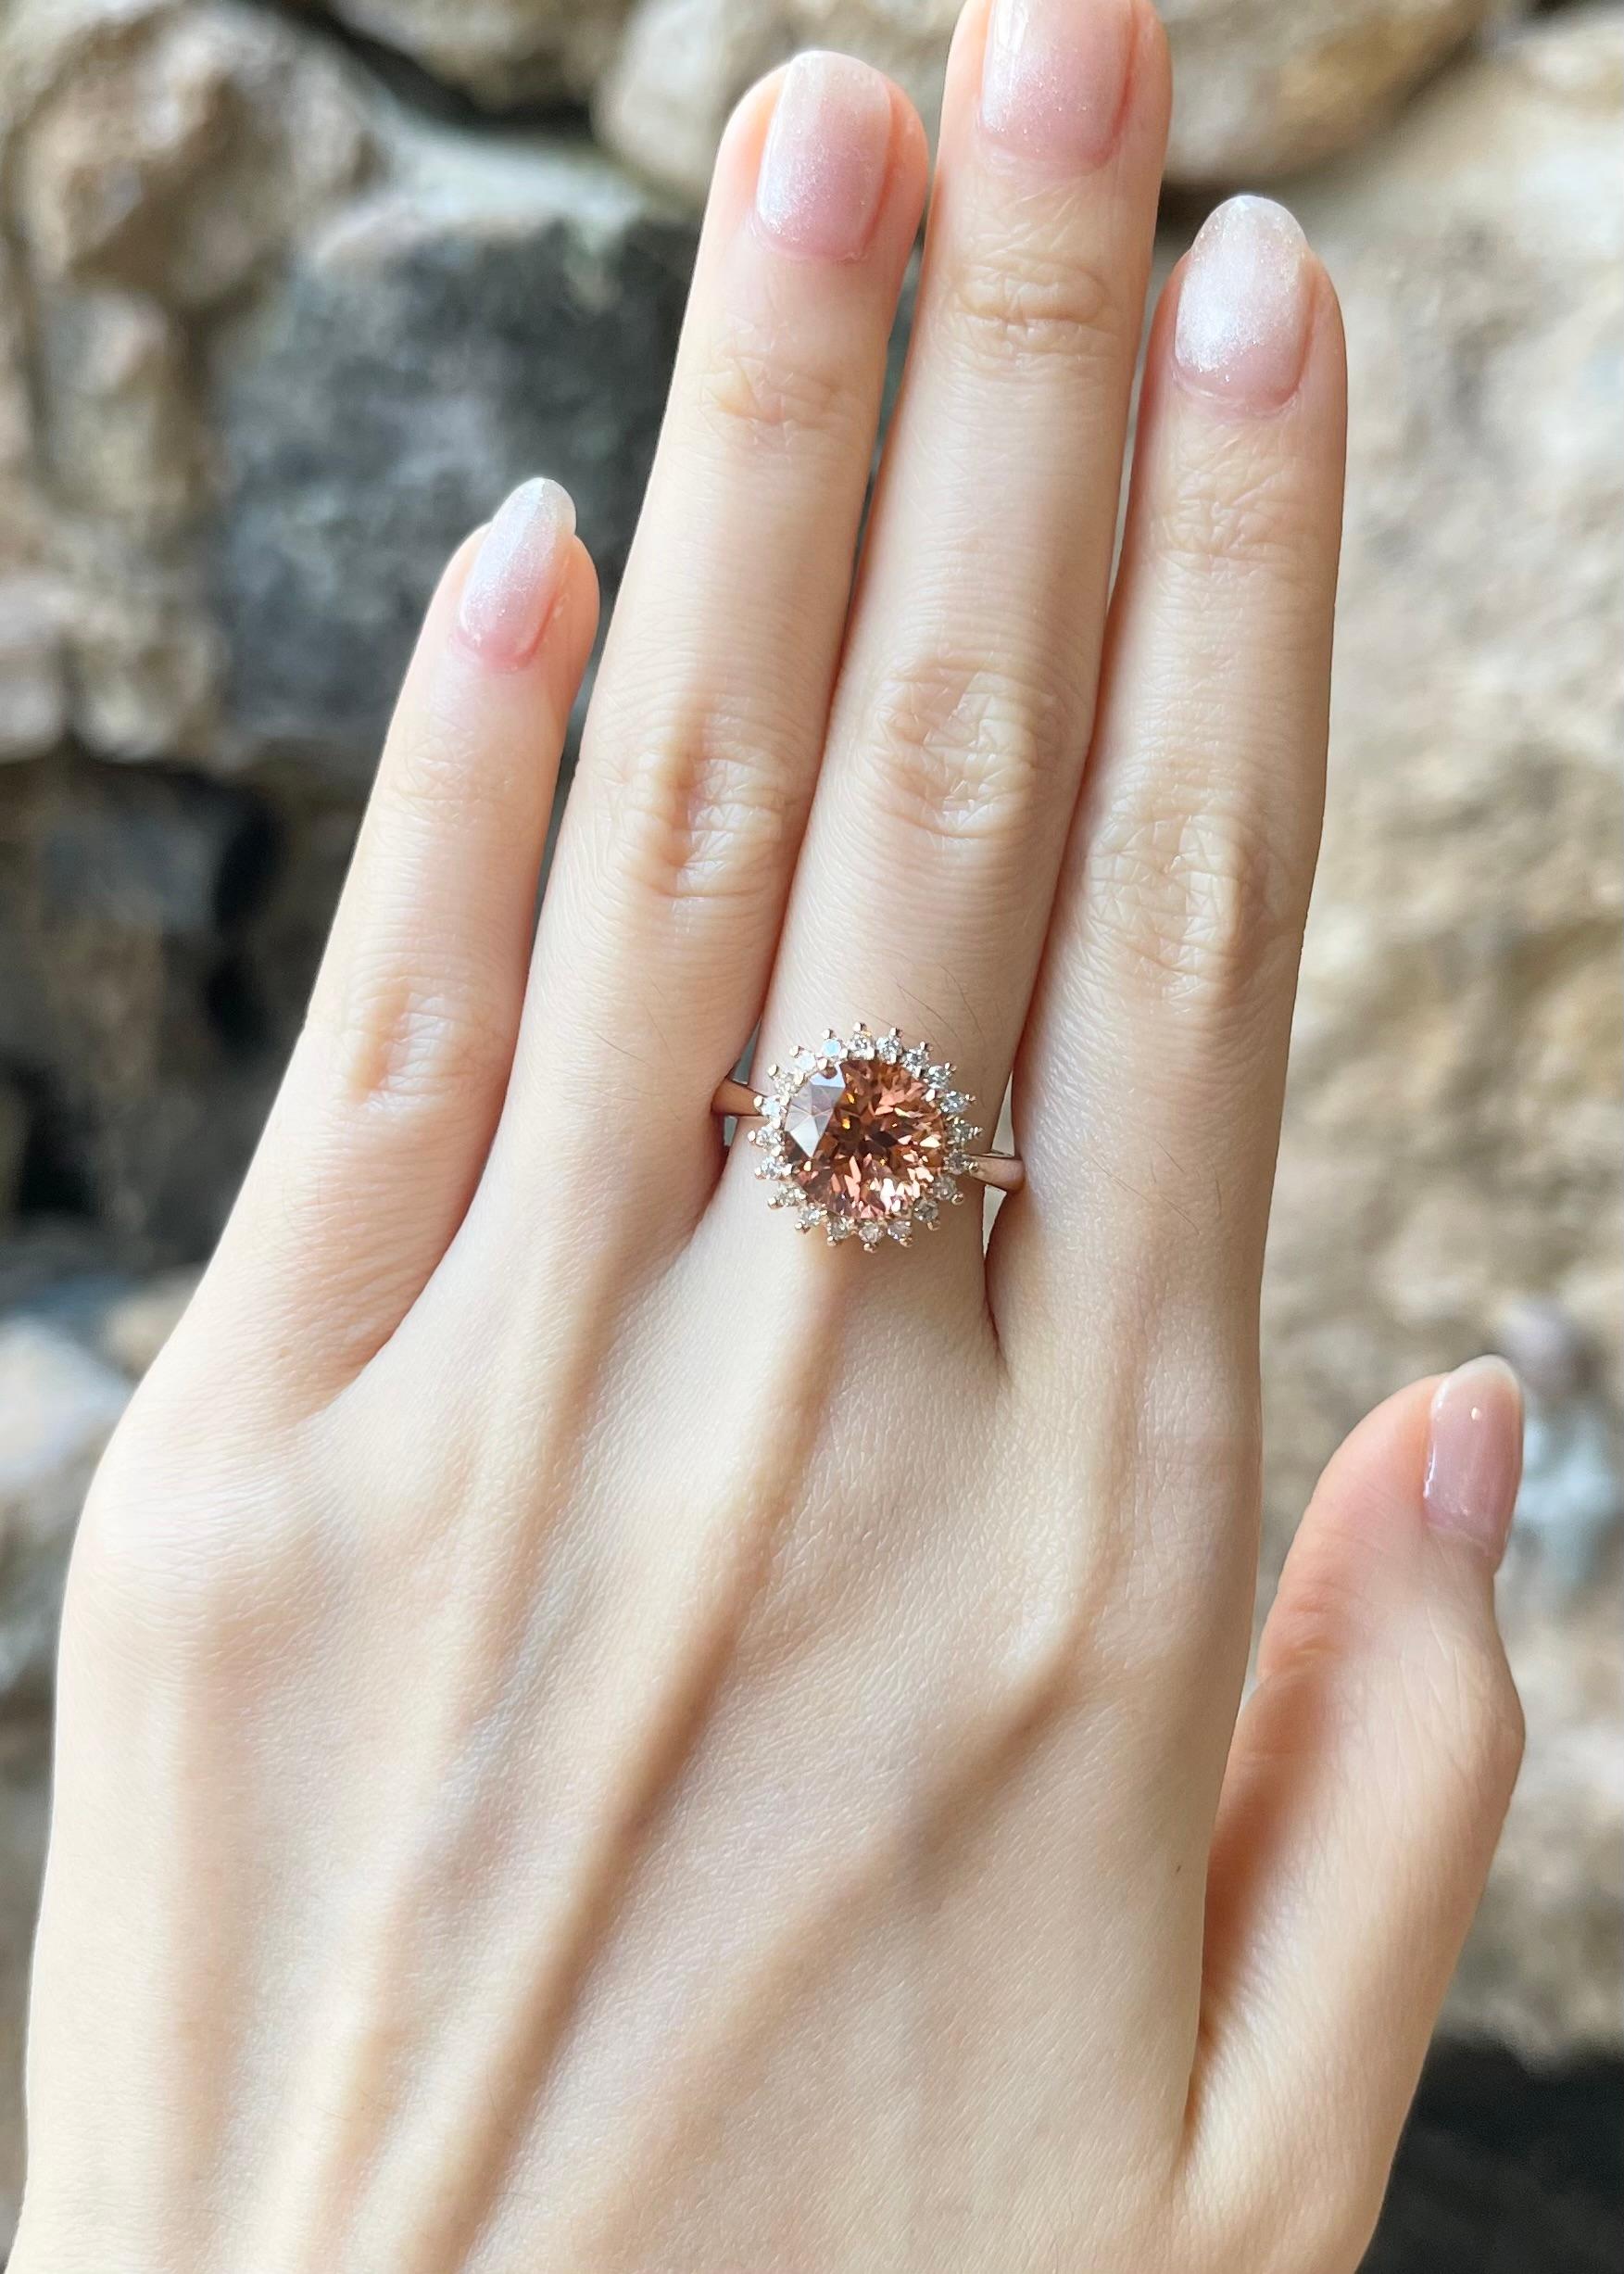 Pink Tourmaline 3.10 carats with Brown Diamond 0.29 carat Ring set in 18K Rose Gold Settings

Width:  1.4 cm 
Length: 1.4 cm
Ring Size: 53
Total Weight: 6.99 grams

